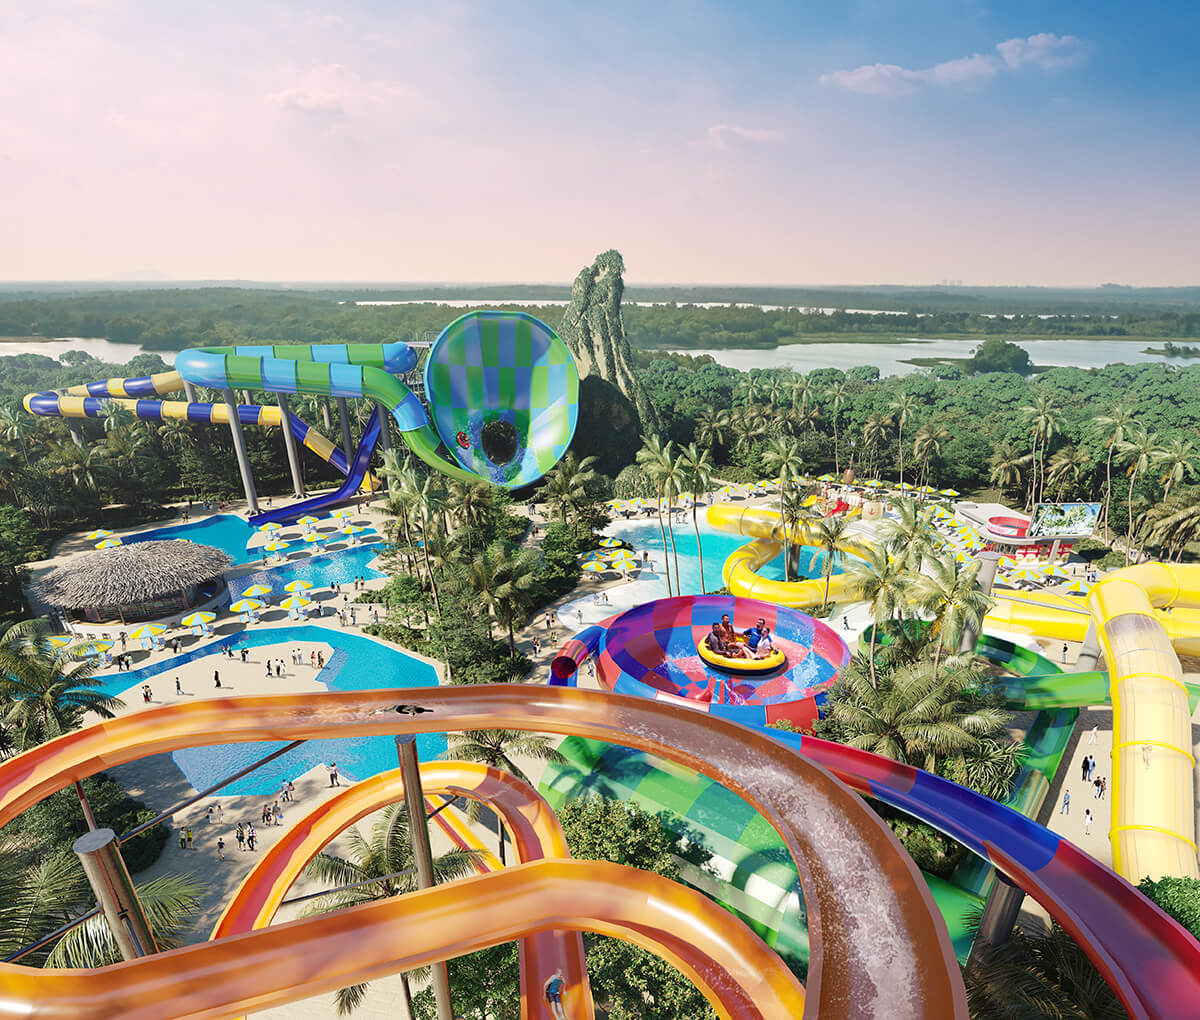 Splashmania features heart-pounding rides like the Free Fall, Ravage River and Thrilling Slide.